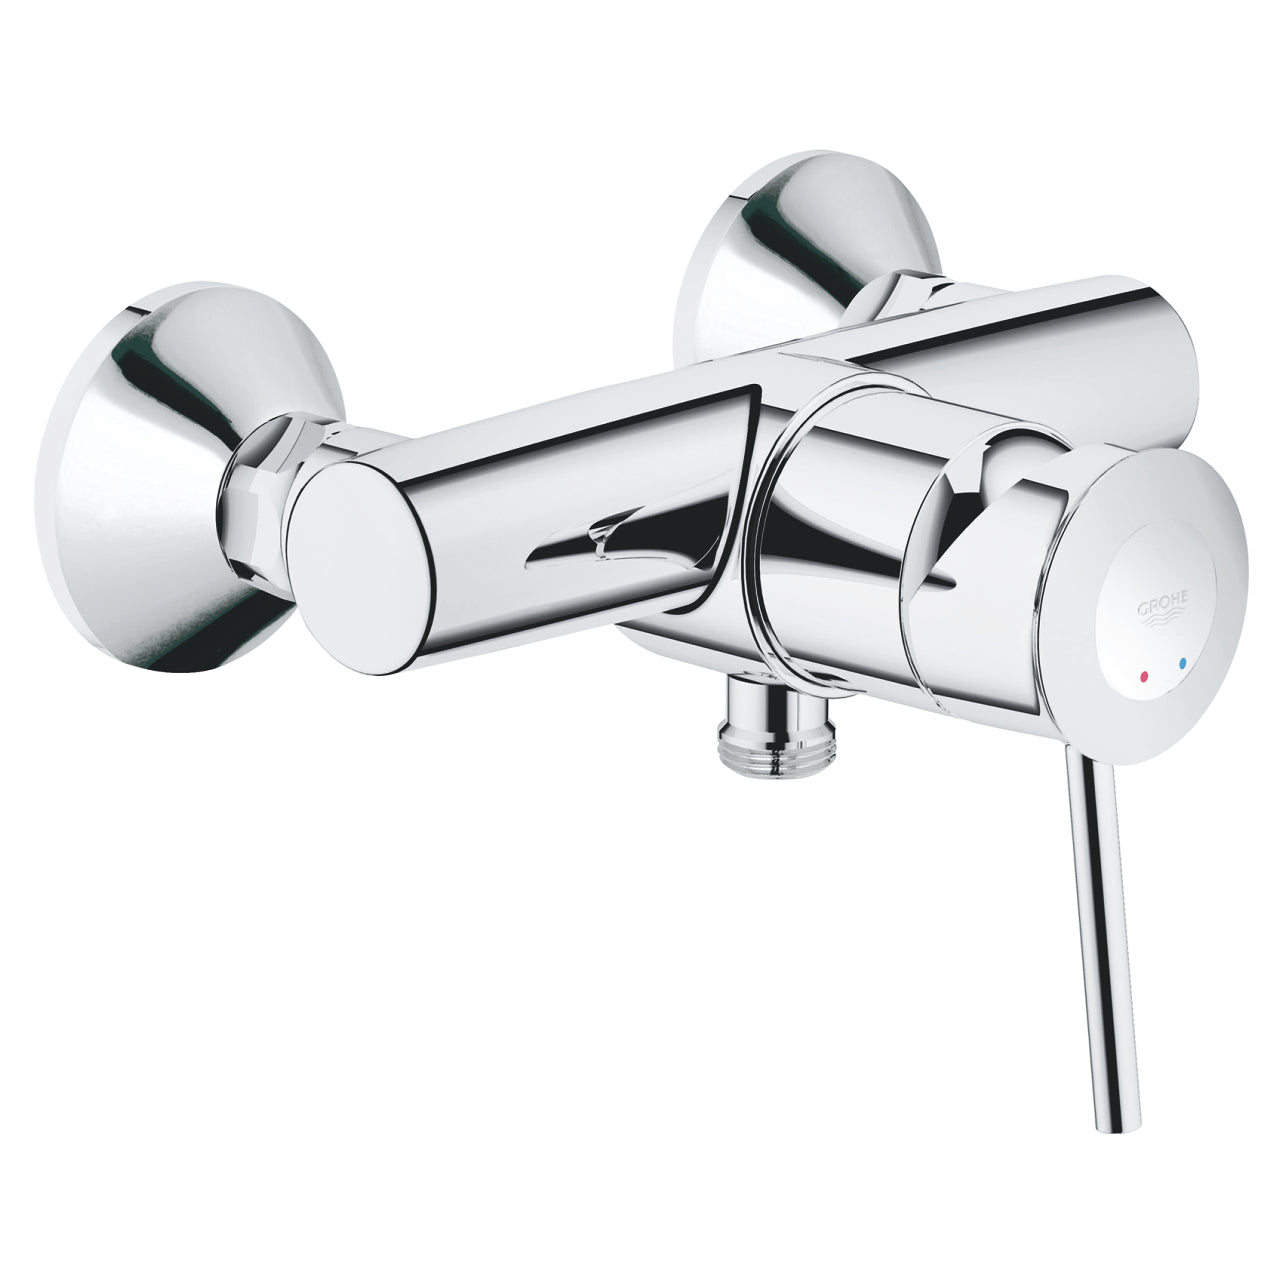 Grohe Bauclassic Single Lever Shower Mixer 1 / 2 Inch